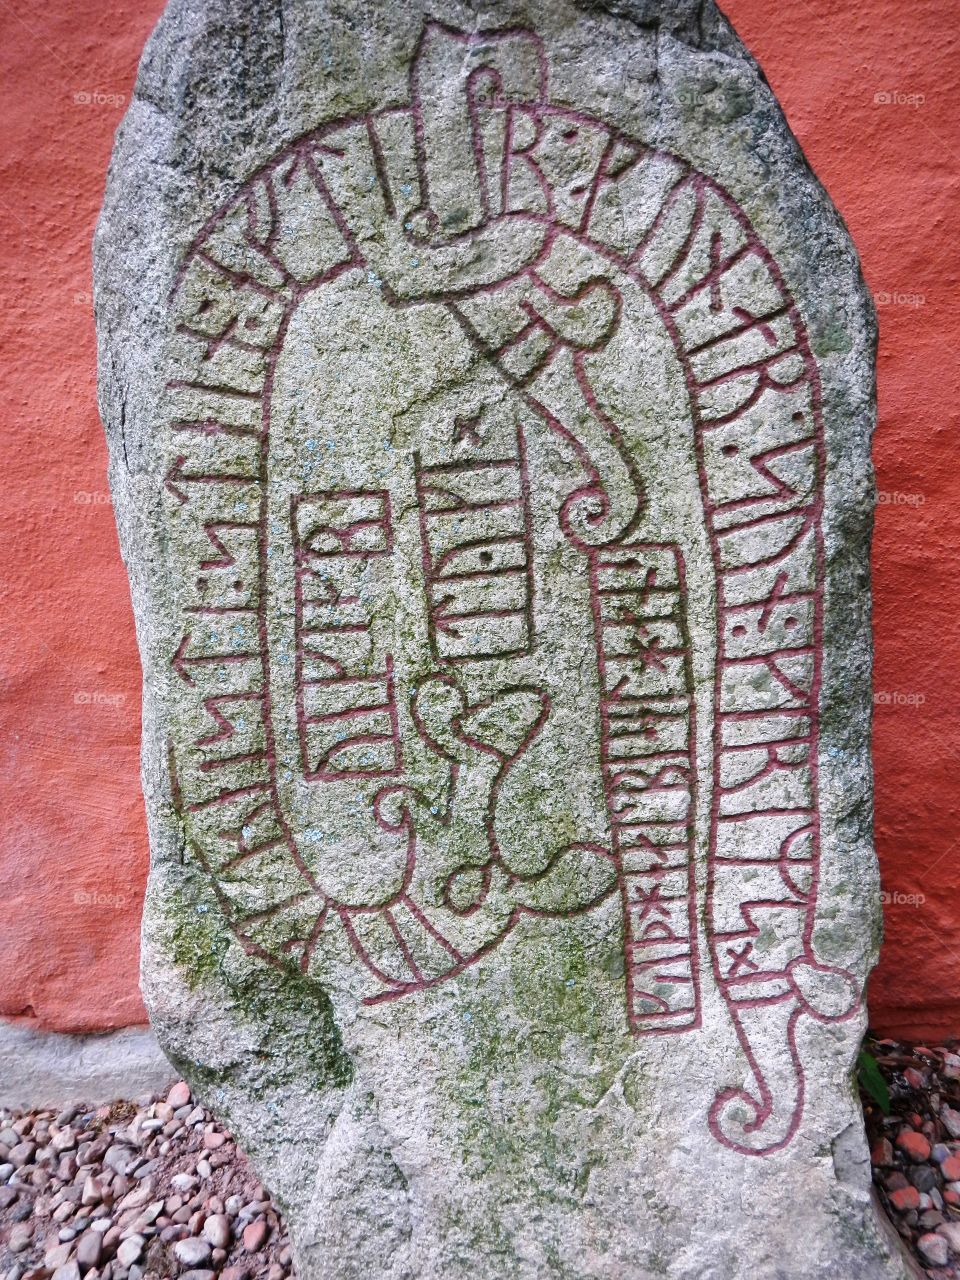 Runestone dated 1000 AD located in Vaxjo Cathedral Sweden. Inscription reads: "Tyke-Tyke Viking erected this stone in memory of Gunnar, Grimm's son. May God help his soul."